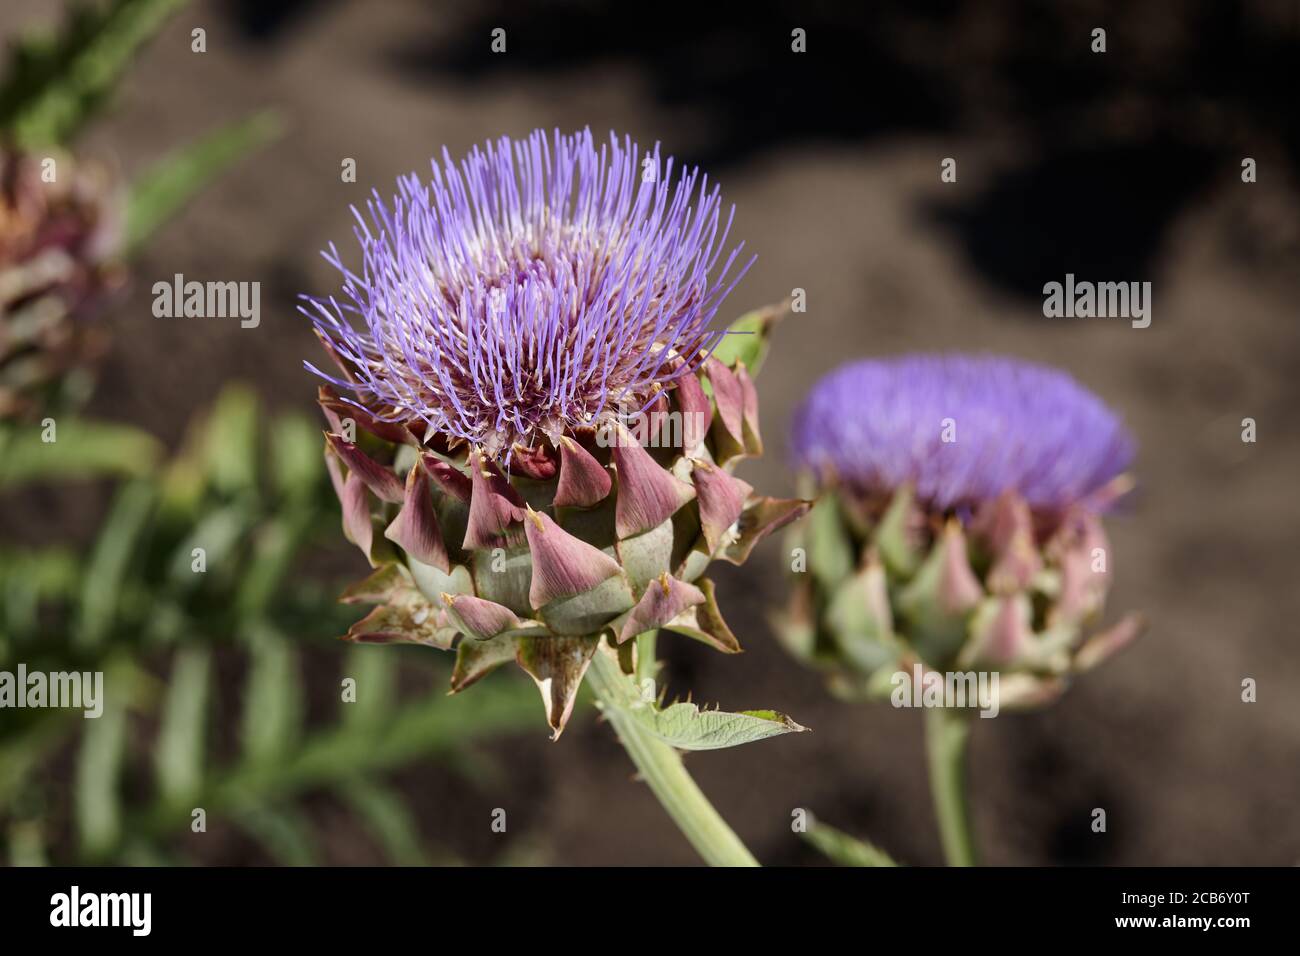 Flowering artichoke plants in garden, blossom close up view Stock Photo